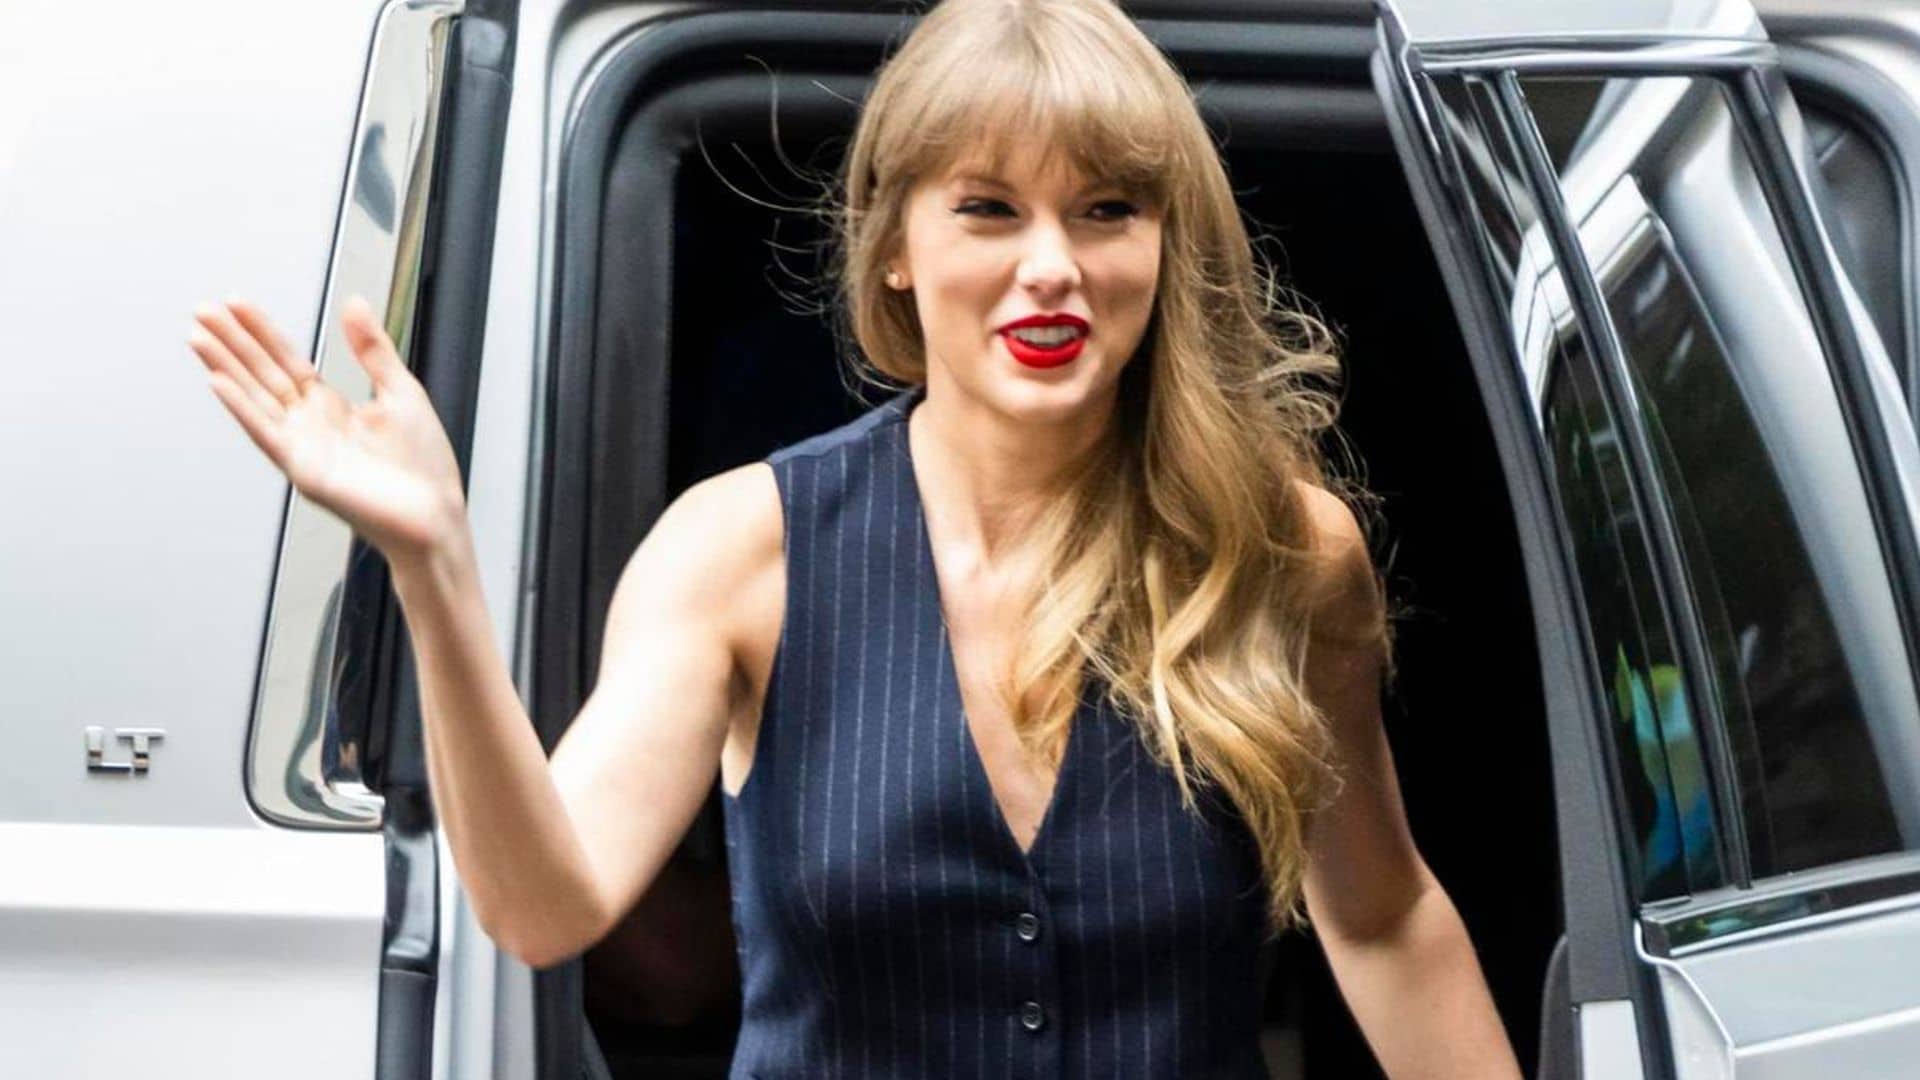 Taylor Swift responds to ‘Shake It Off’ lawsuit: ‘The lyrics were written entirely by me’